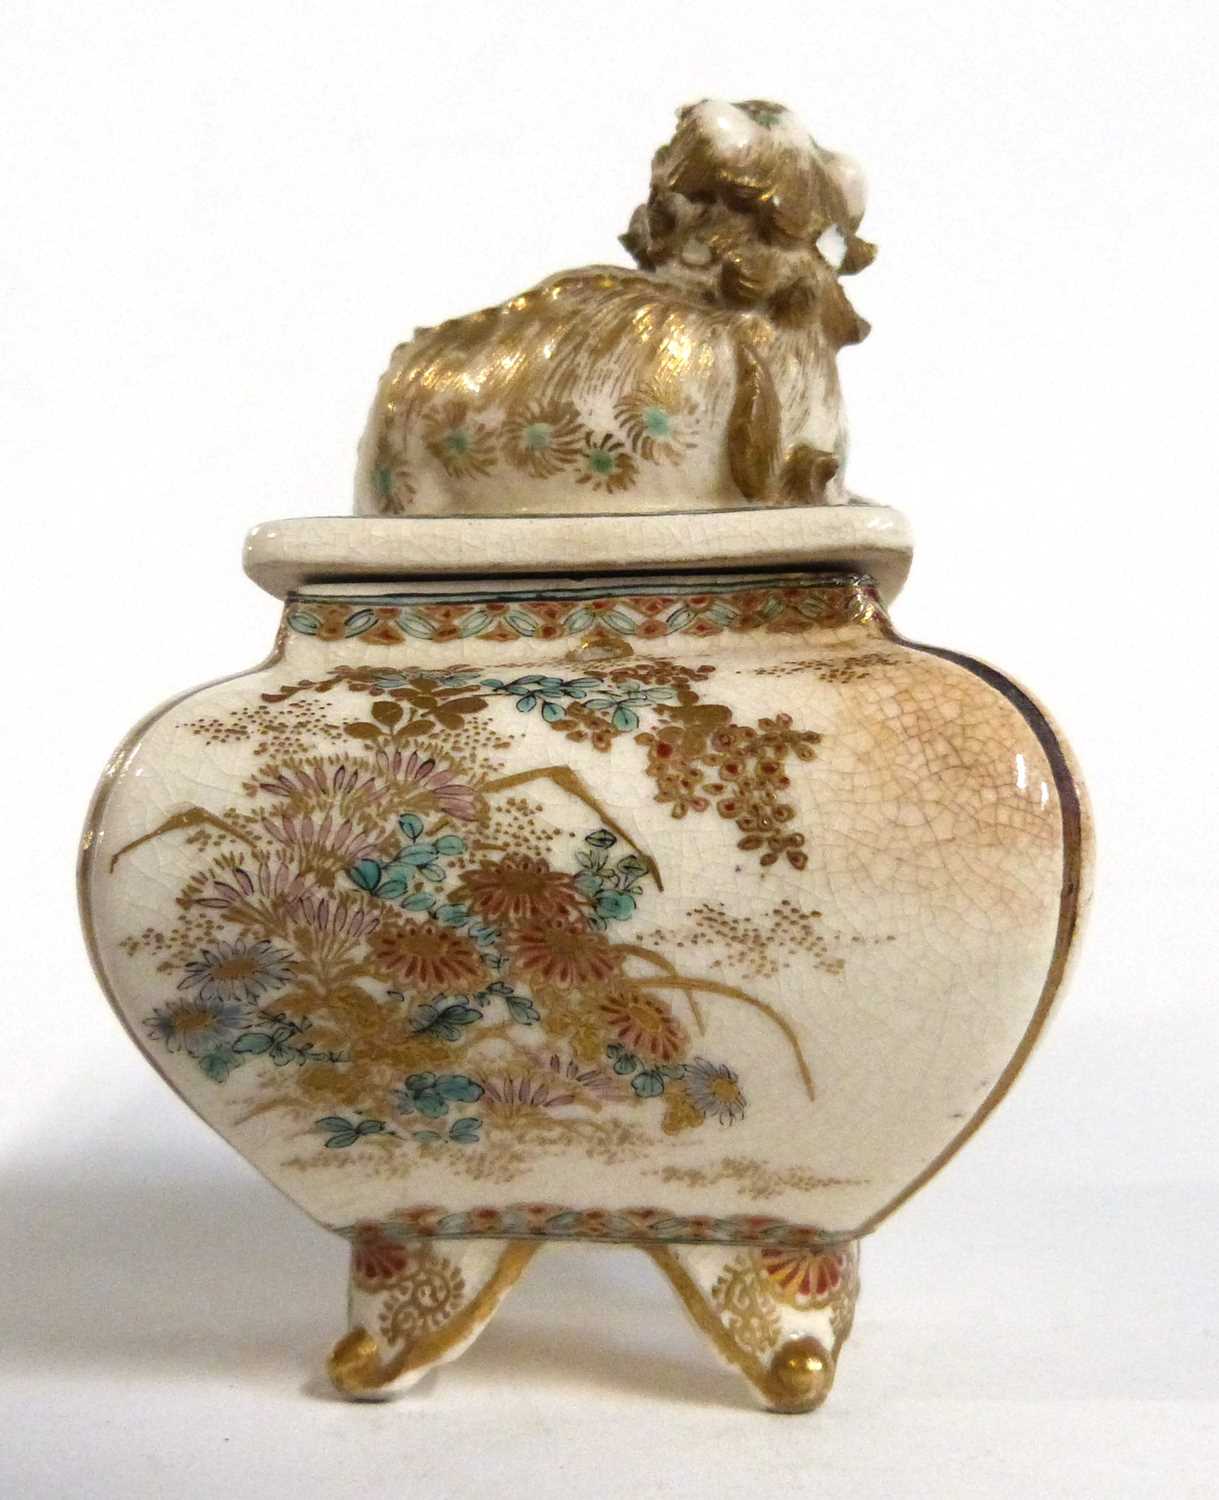 Japanese Satsuma small jar of quatrelobe form, the cover decorated with a dragon finial - Image 3 of 8